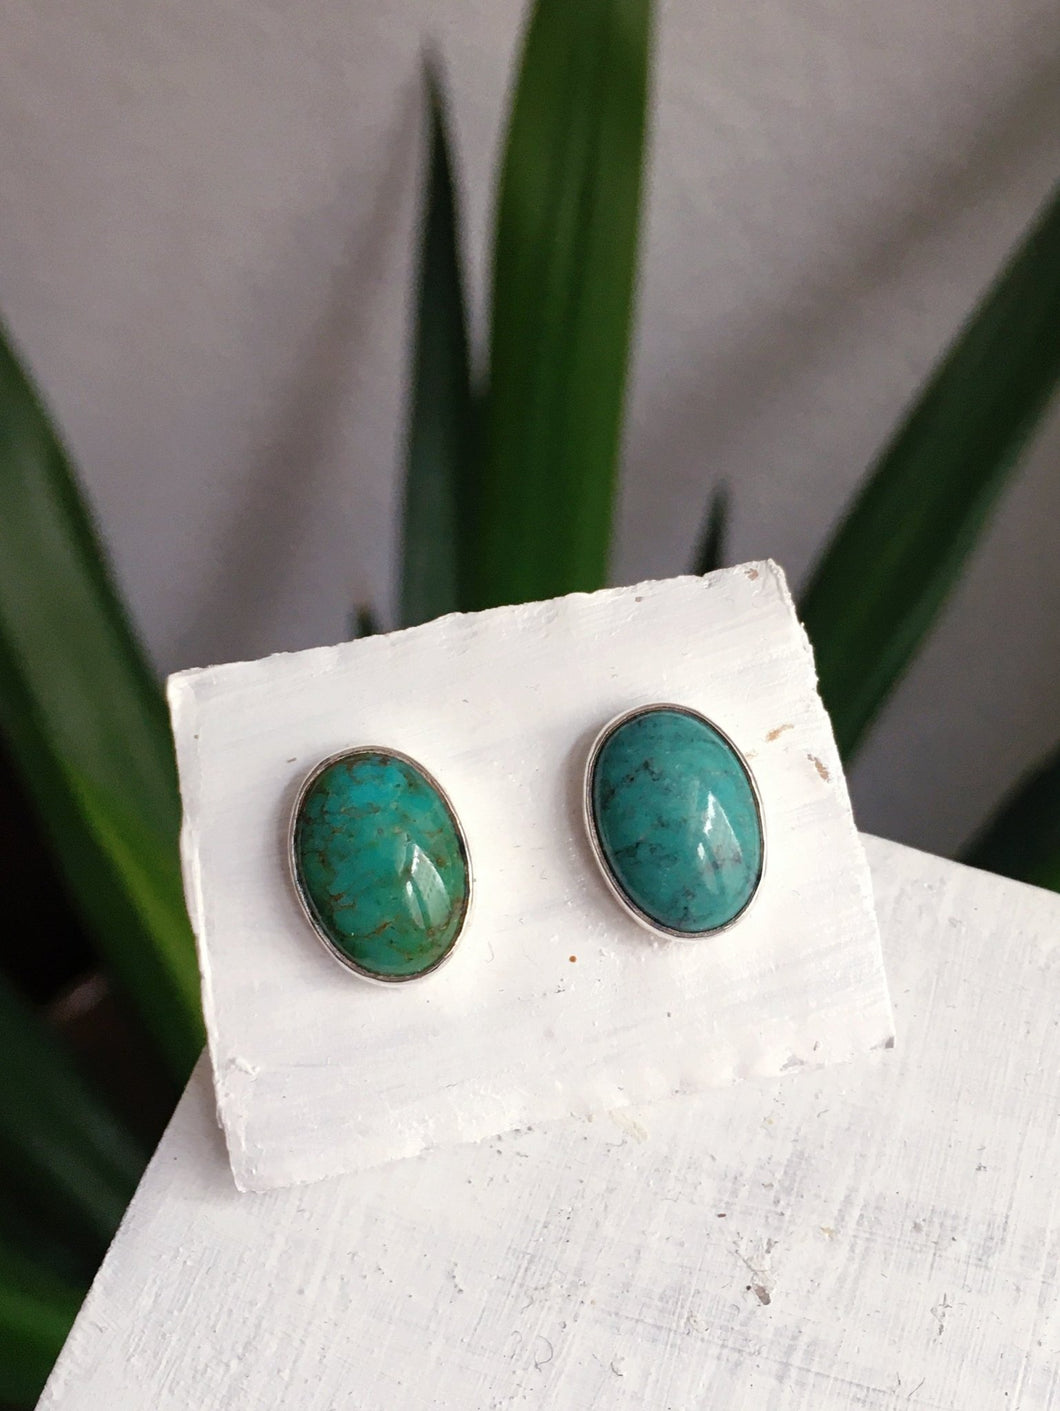 A pair of Oval Turquoise Studs by Kathrin Jona sitting on top of a wooden box.